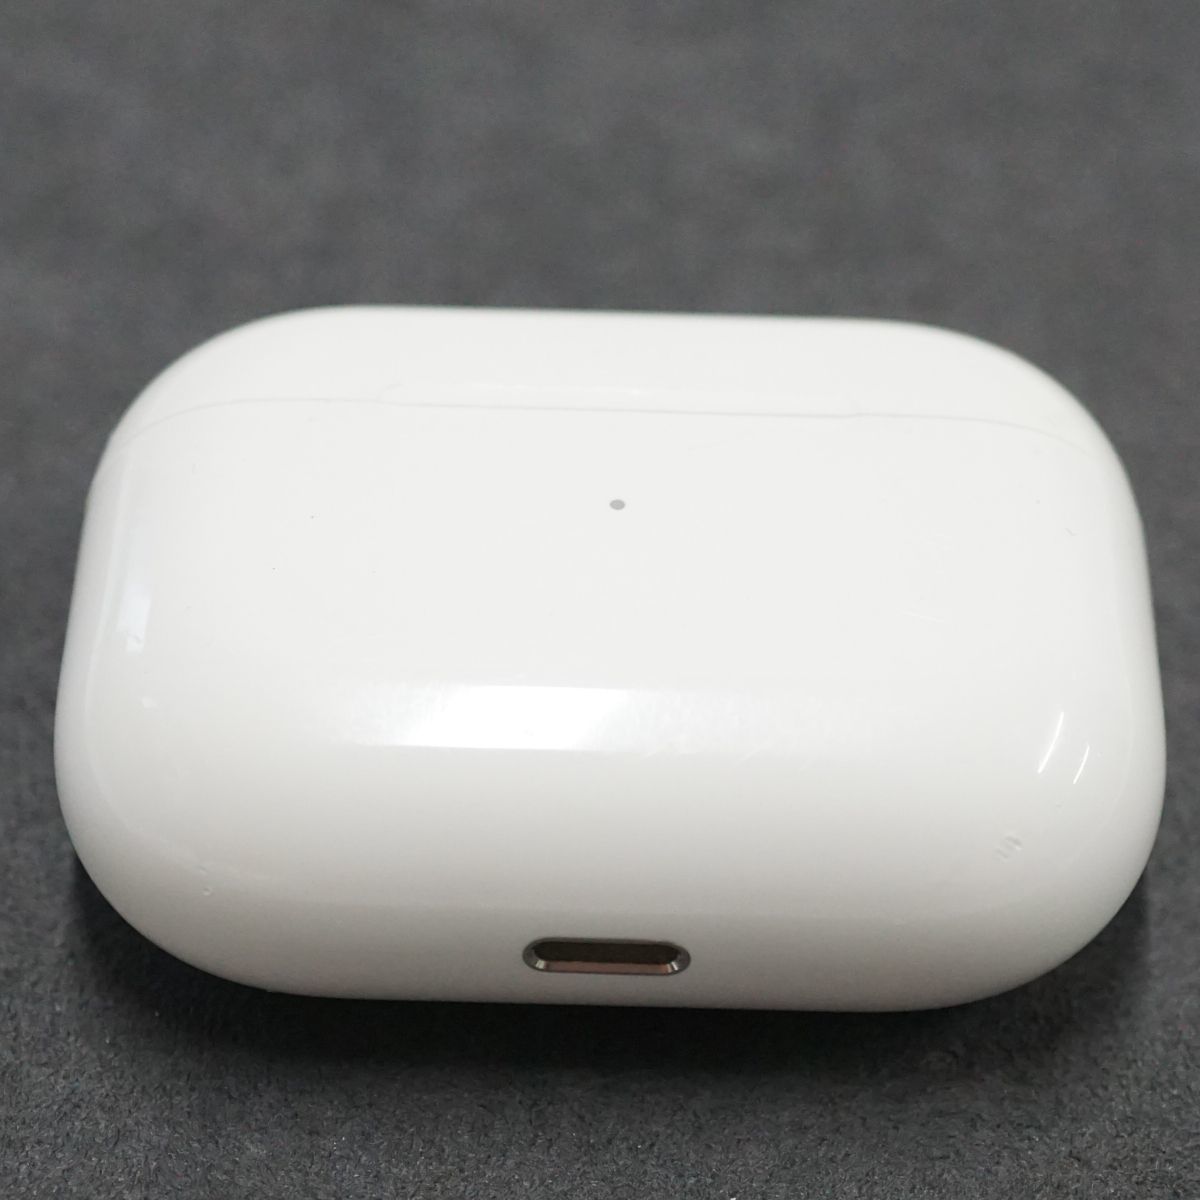 Apple AirPods Pro 充電ケースのみ USED美品 第一世代 イヤホン エアーポッズ プロ Qi MWP22J/A A2190 純正 送料無料 即日発送 V9156の画像3